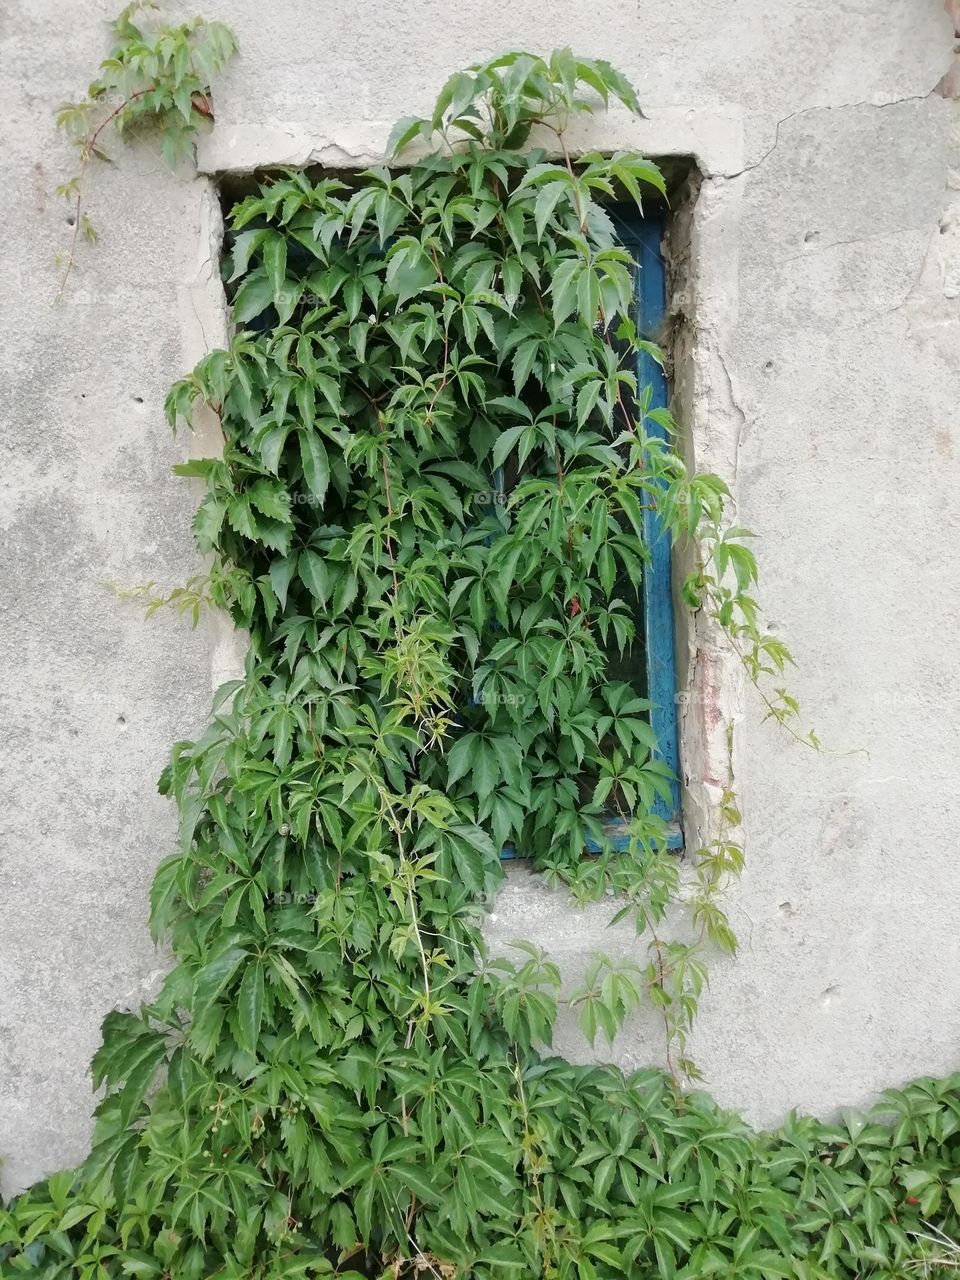 Plants growing on the window of the building